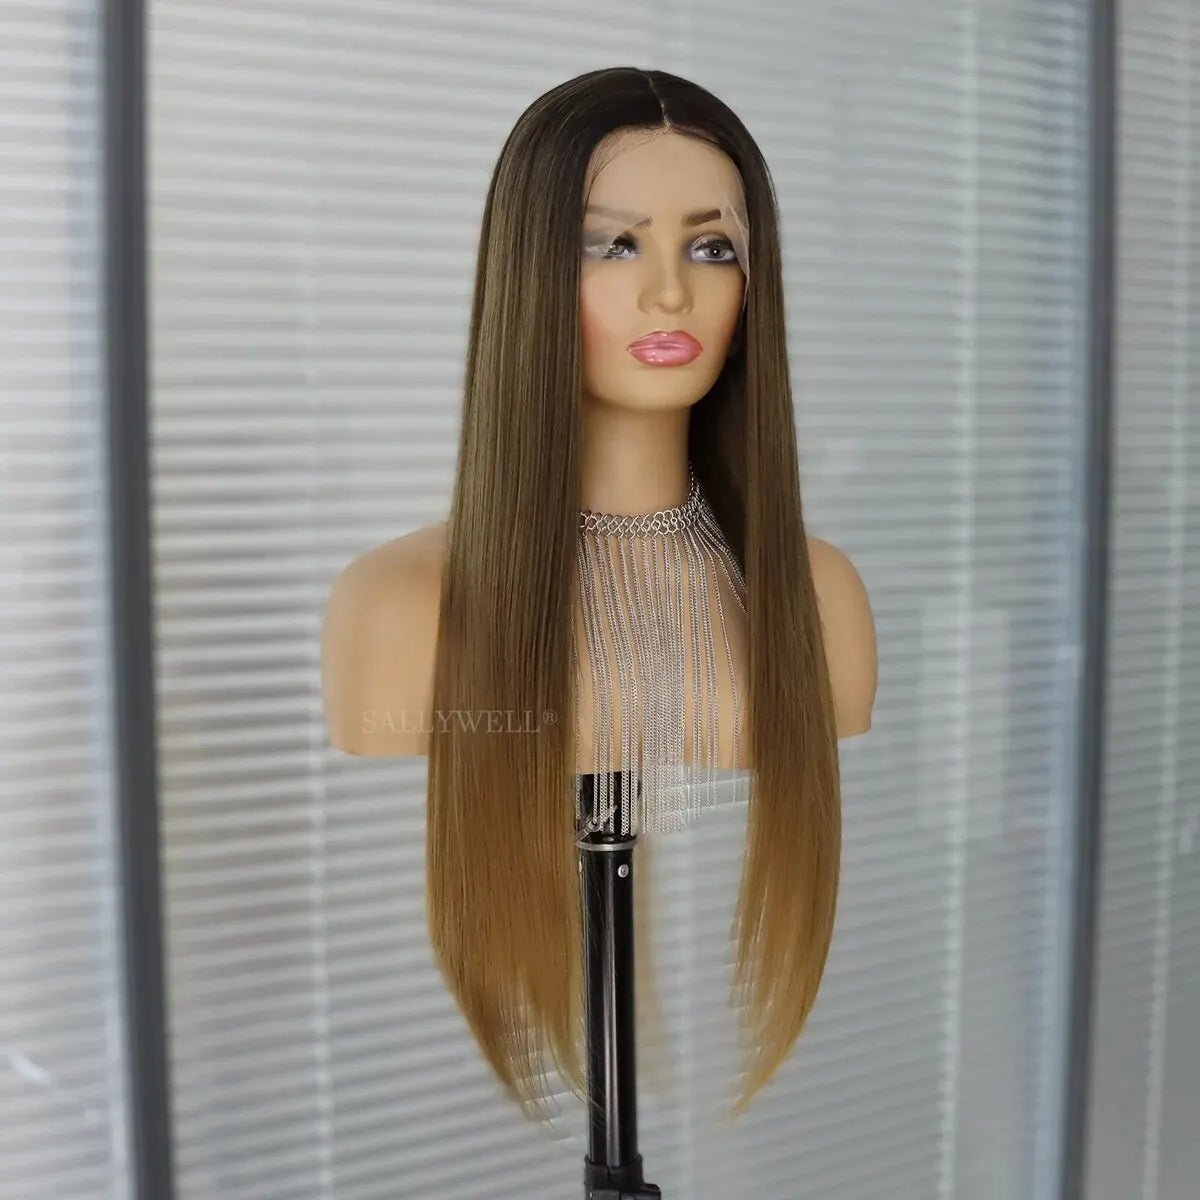 Glossy Synthetic Wig Options - HairNjoy